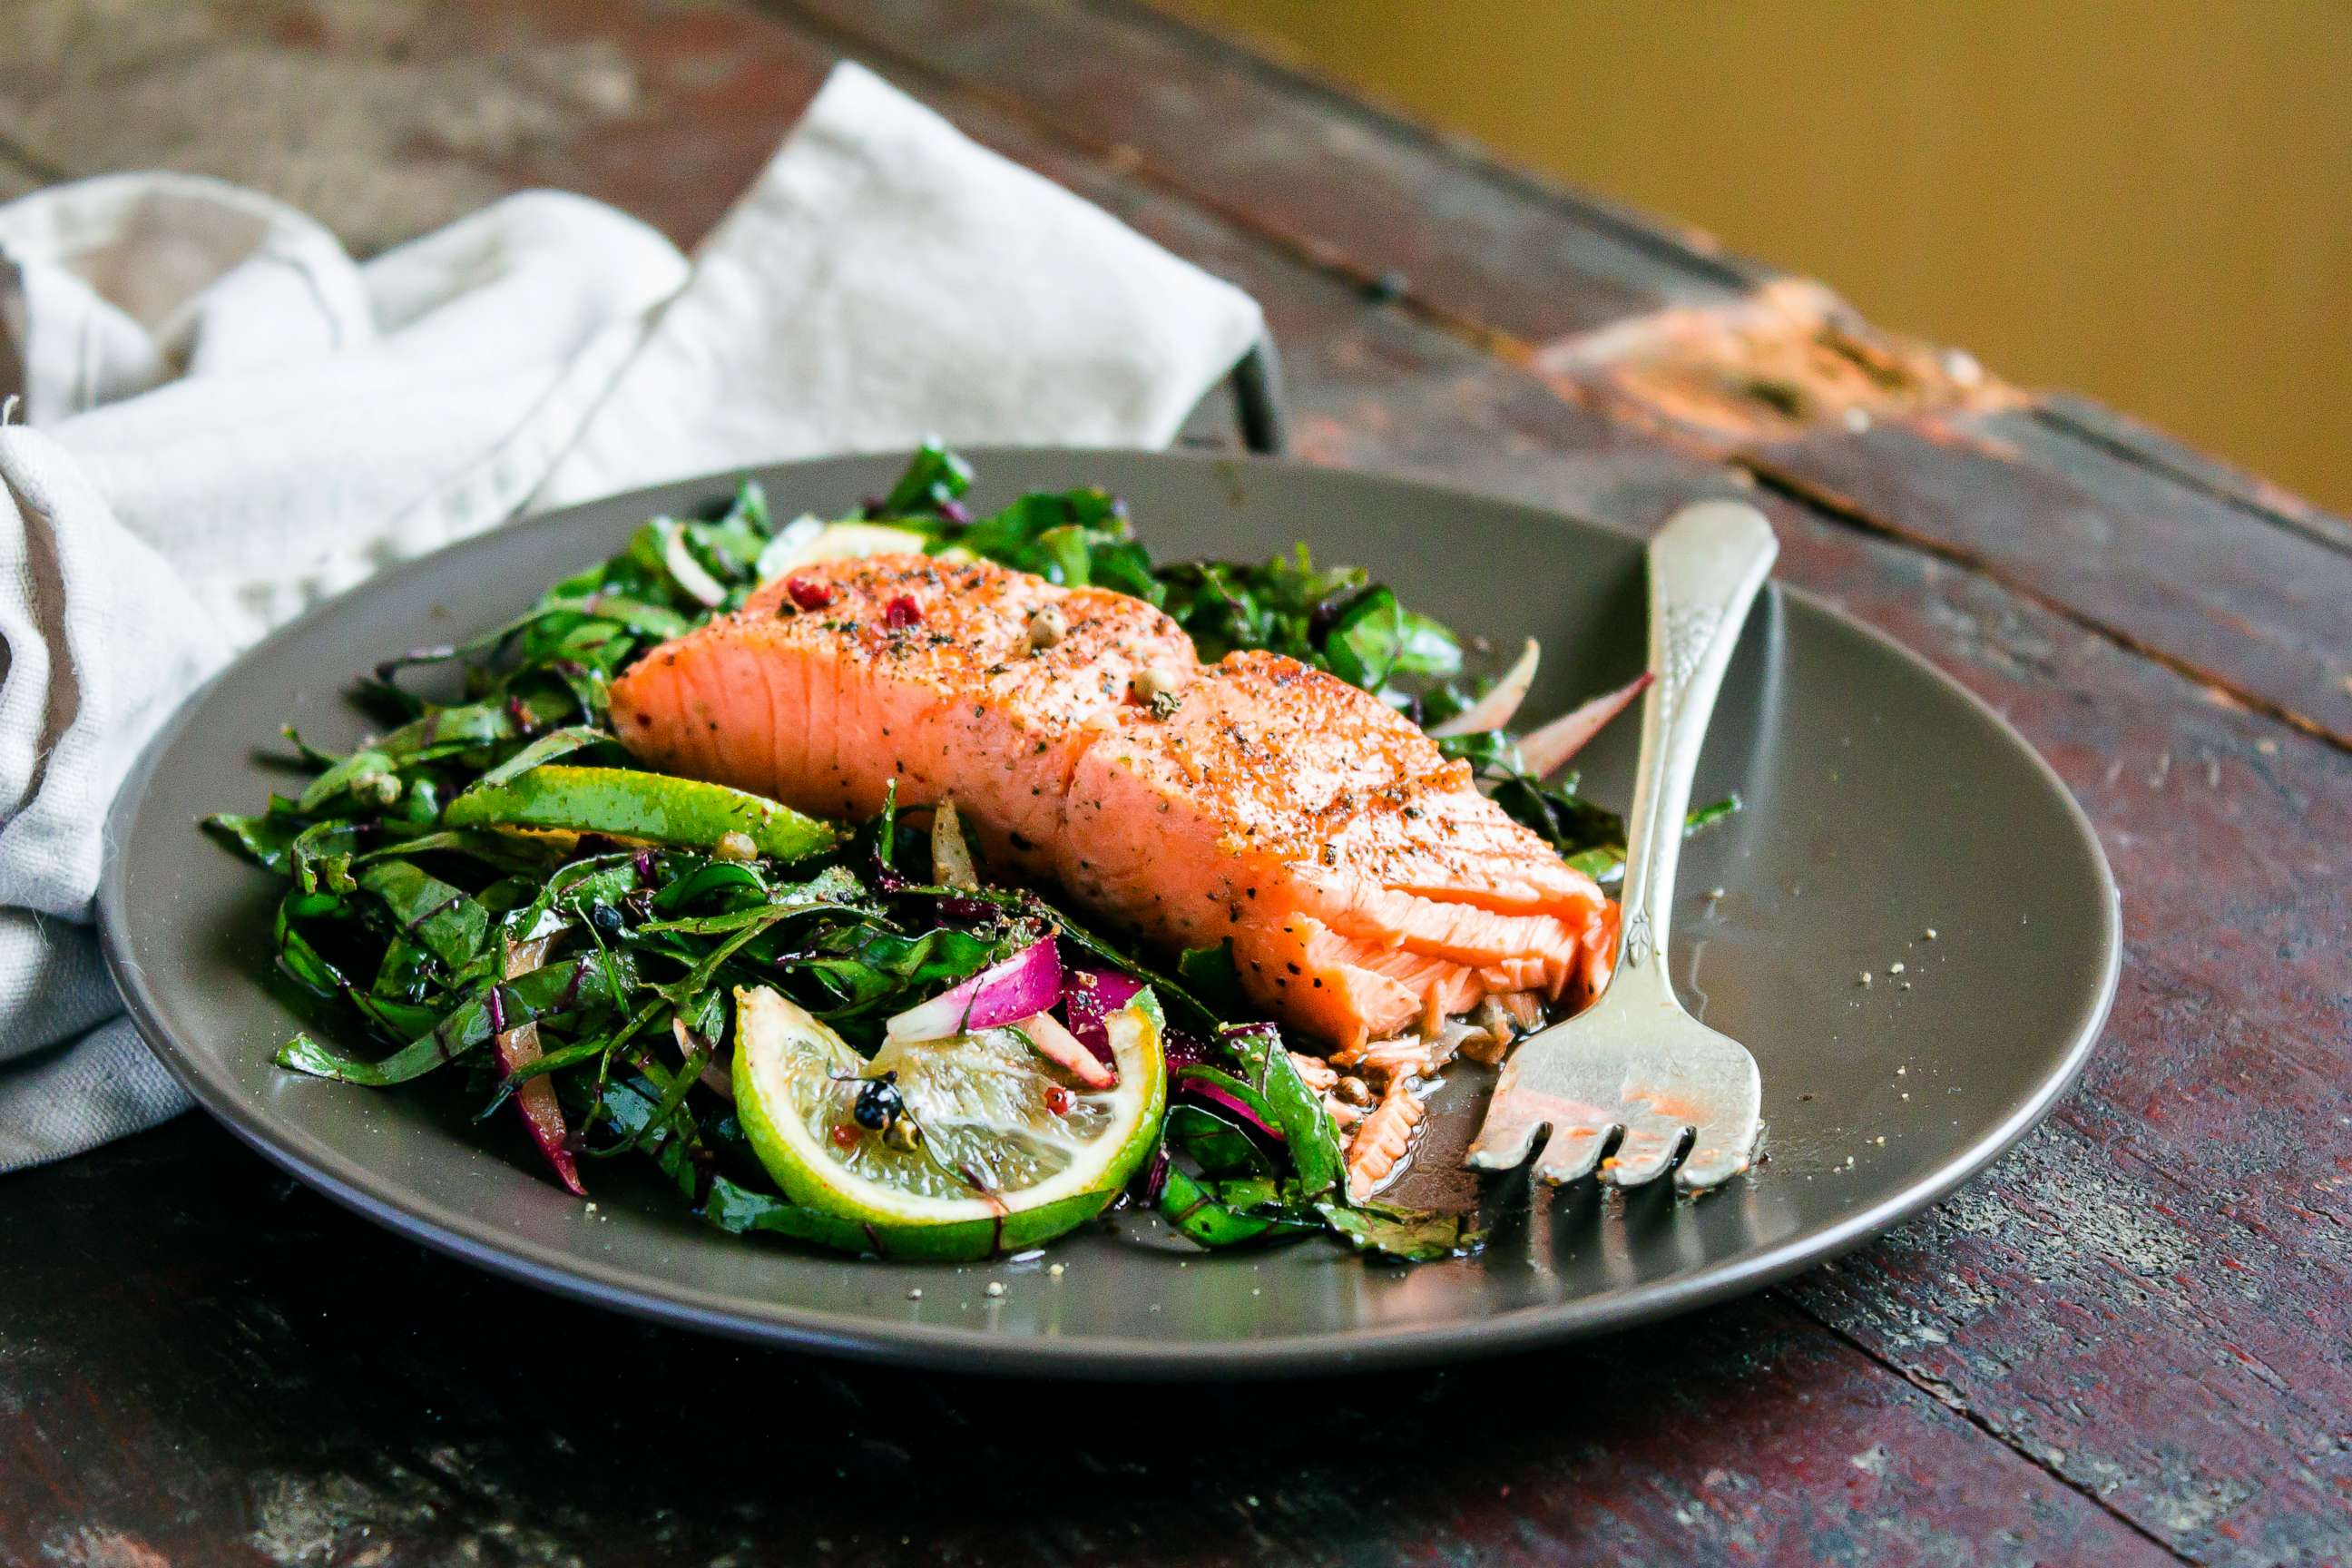 PHOTO: A filet of salmon is served over a bed of greens in this stock photo.